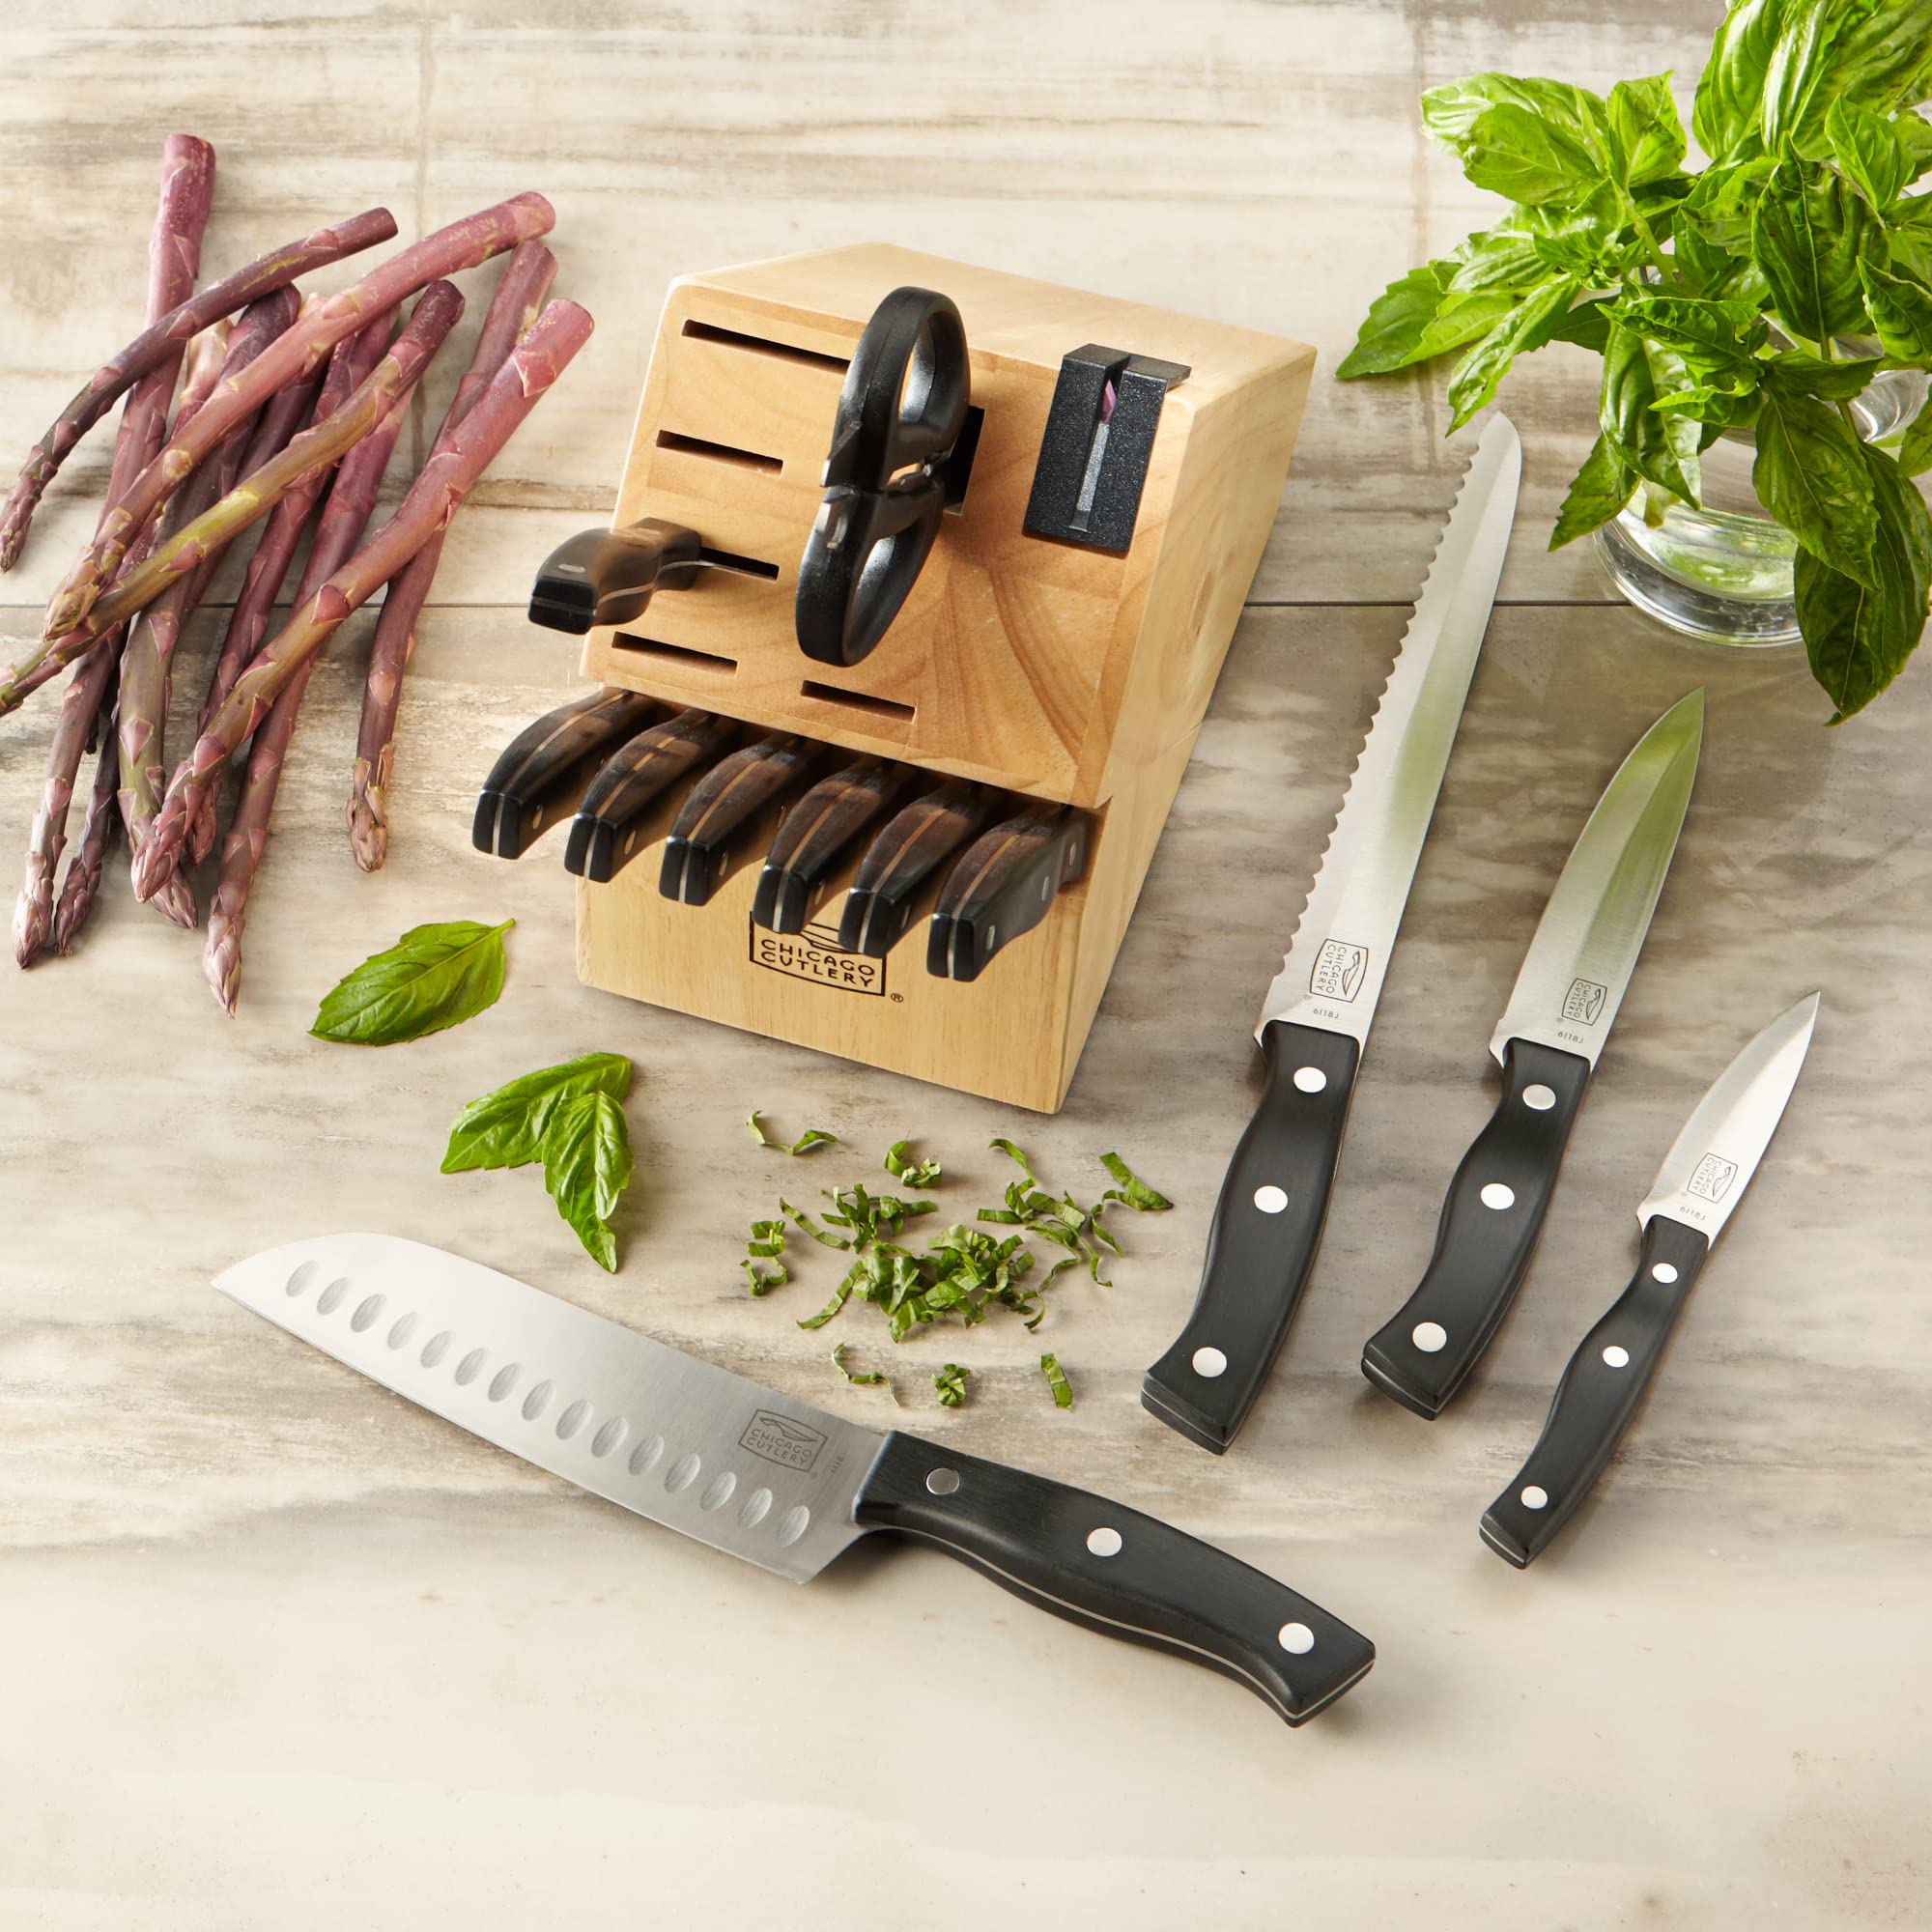 Chicago Cutlery Ellsworth (13-PC) Kitchen Knife Block Set With Wooden Block & Built-In Sharpener, Ergonomic Handles and Stainless Steel Professional Chef Knife Set & Scissors With Bottle Opener